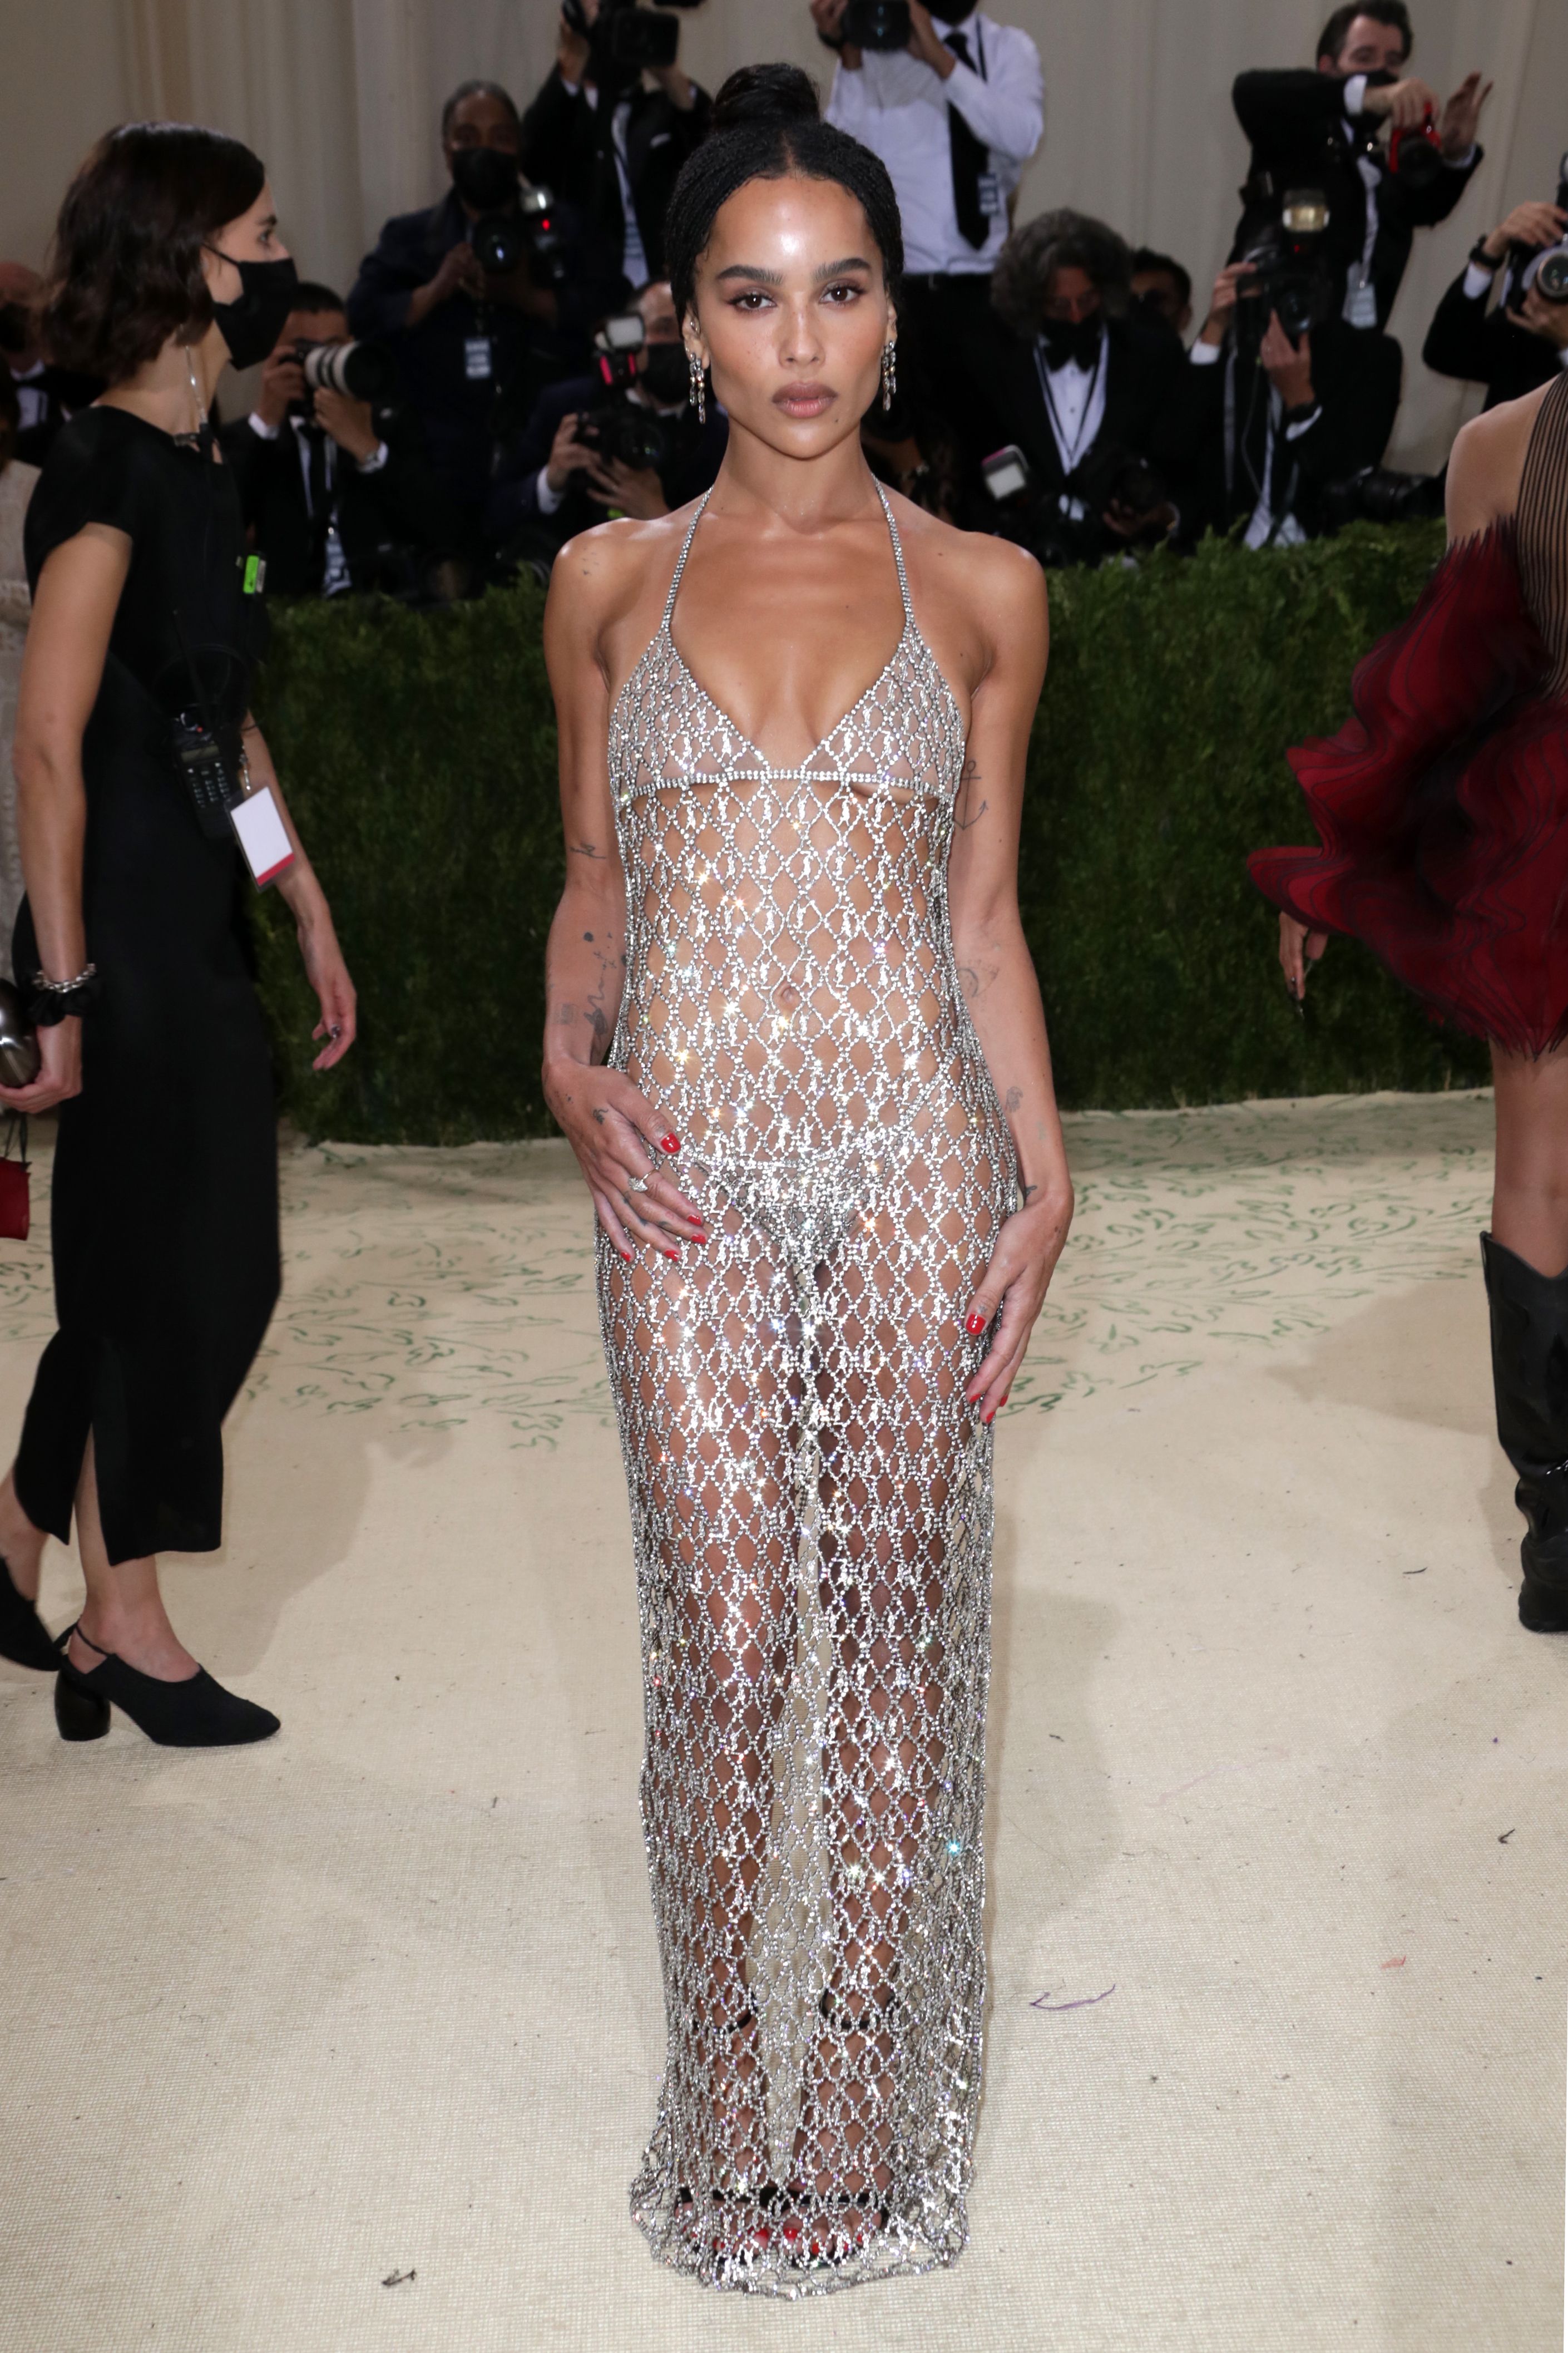 Met Gala 2021: Celebrity Outfits Inspired by Hollywood Icons